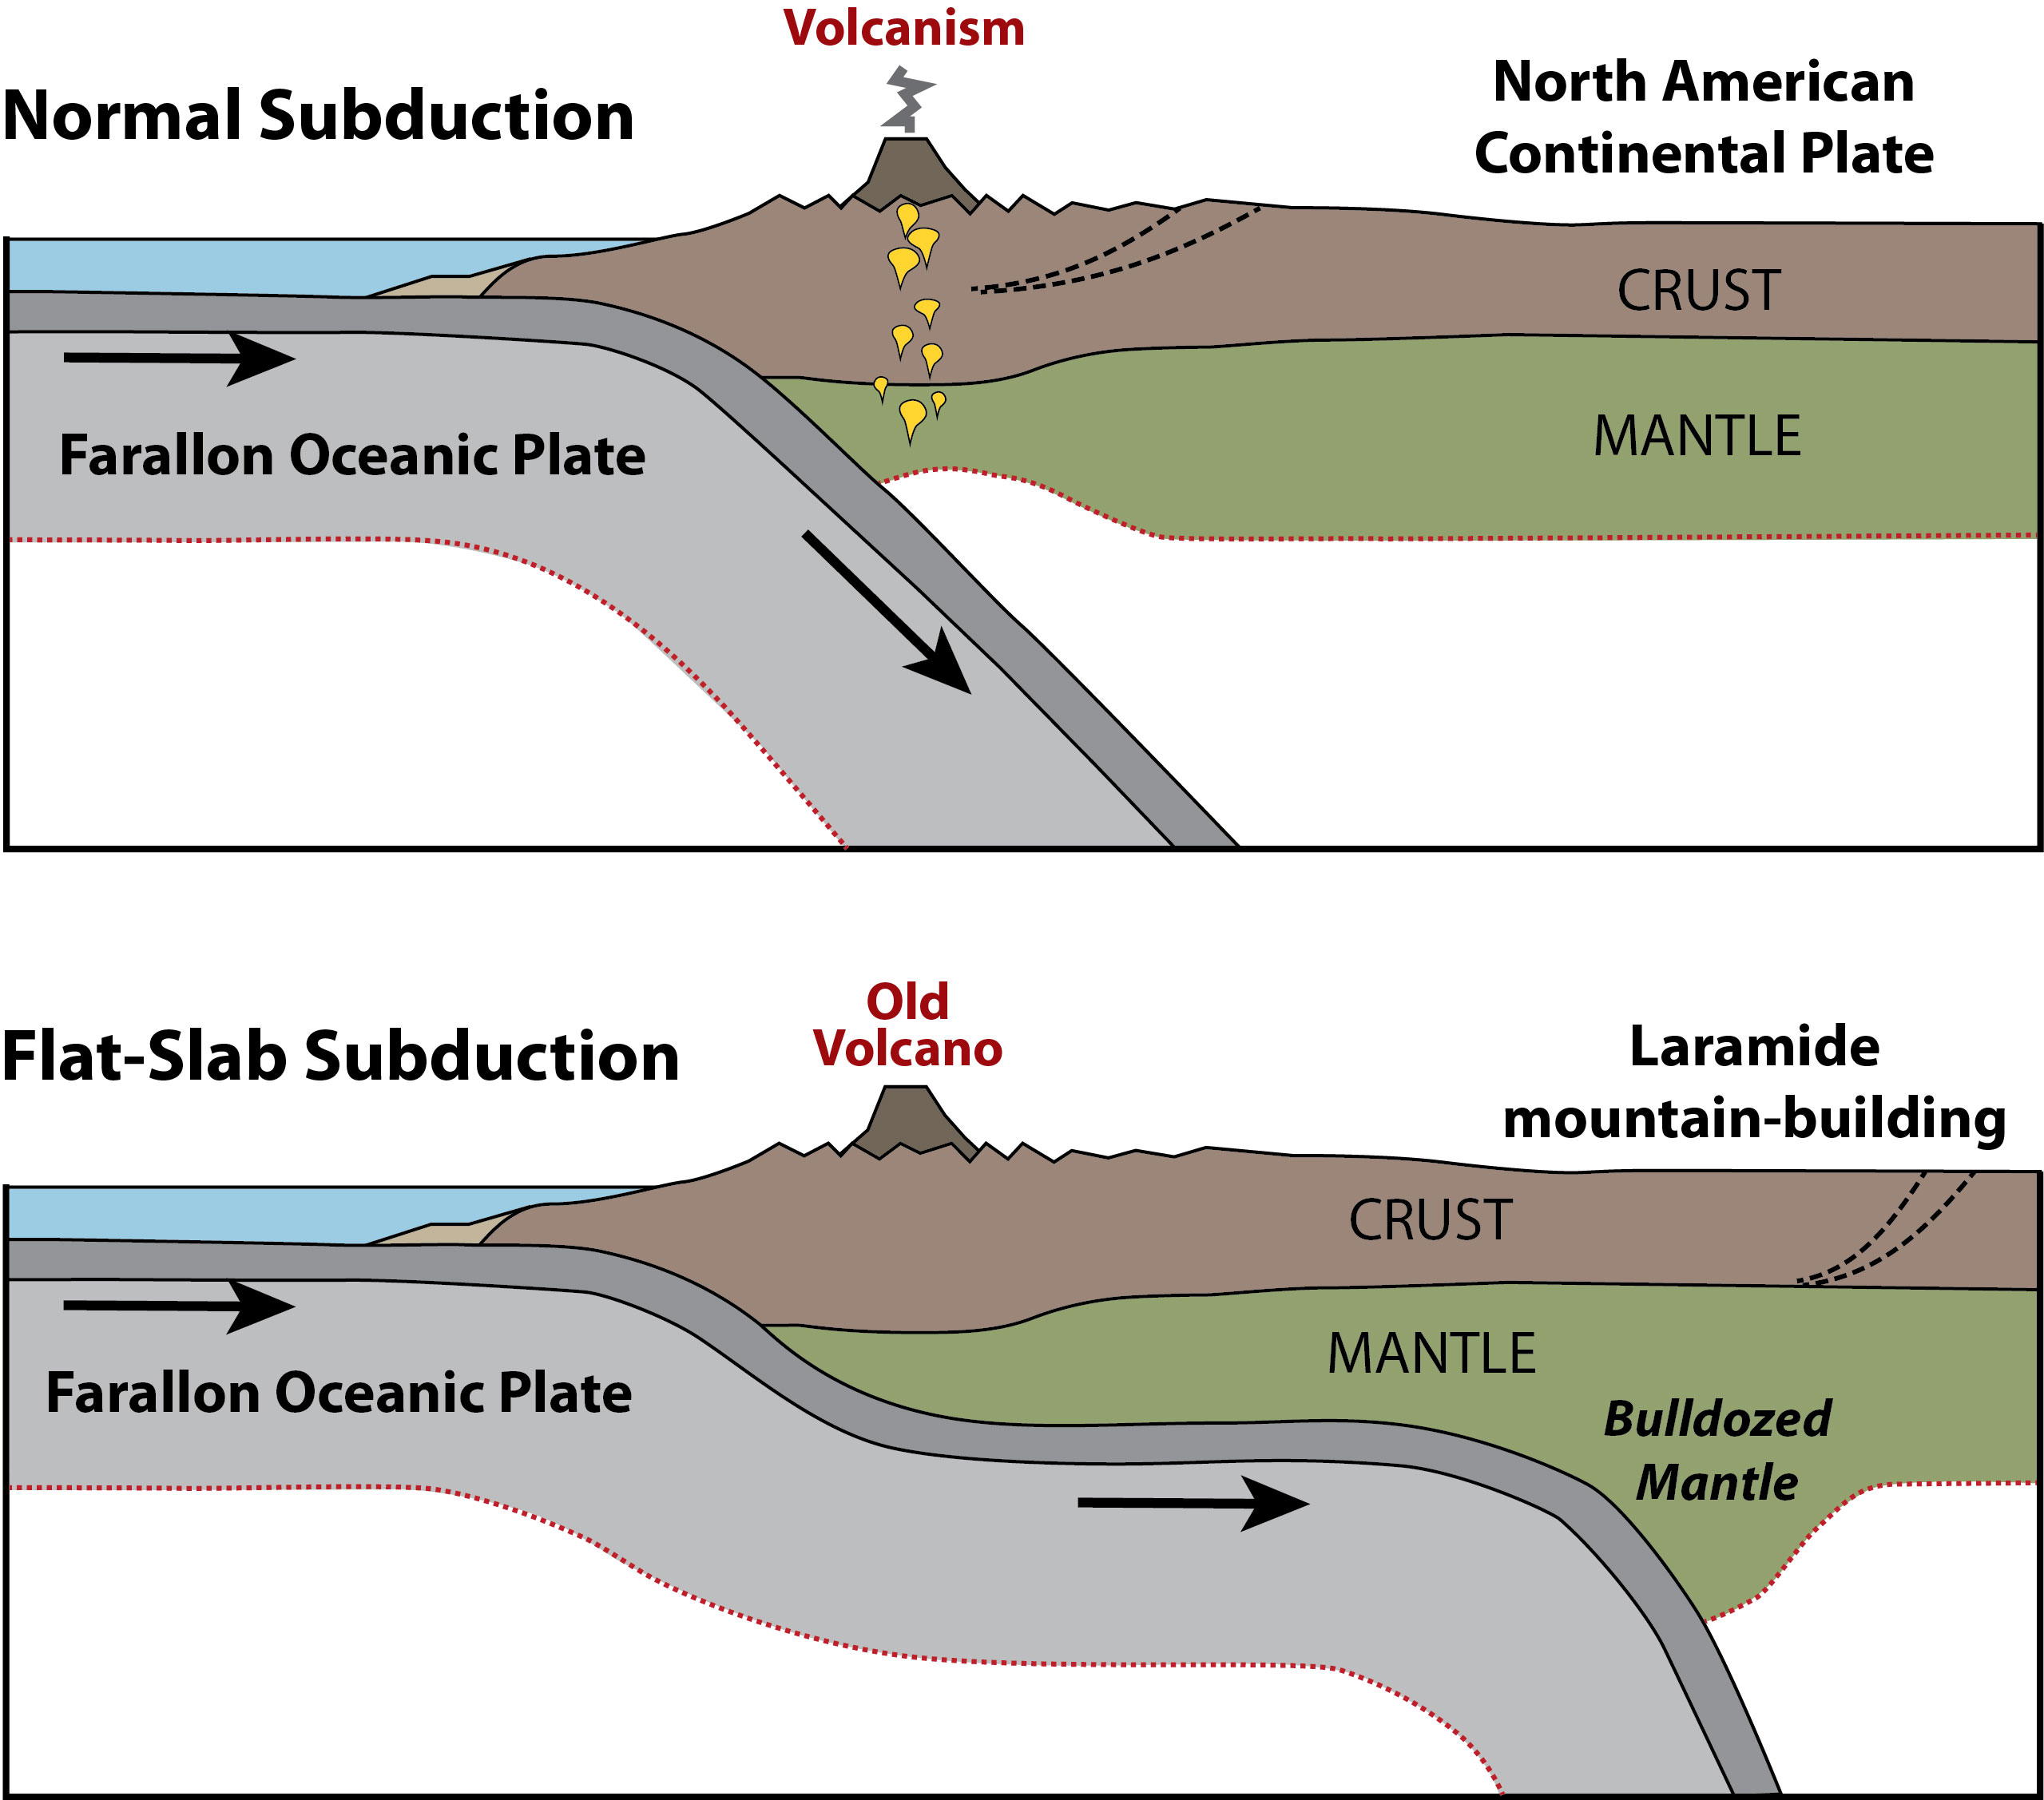 A visualization of the process of flat-slab subduction